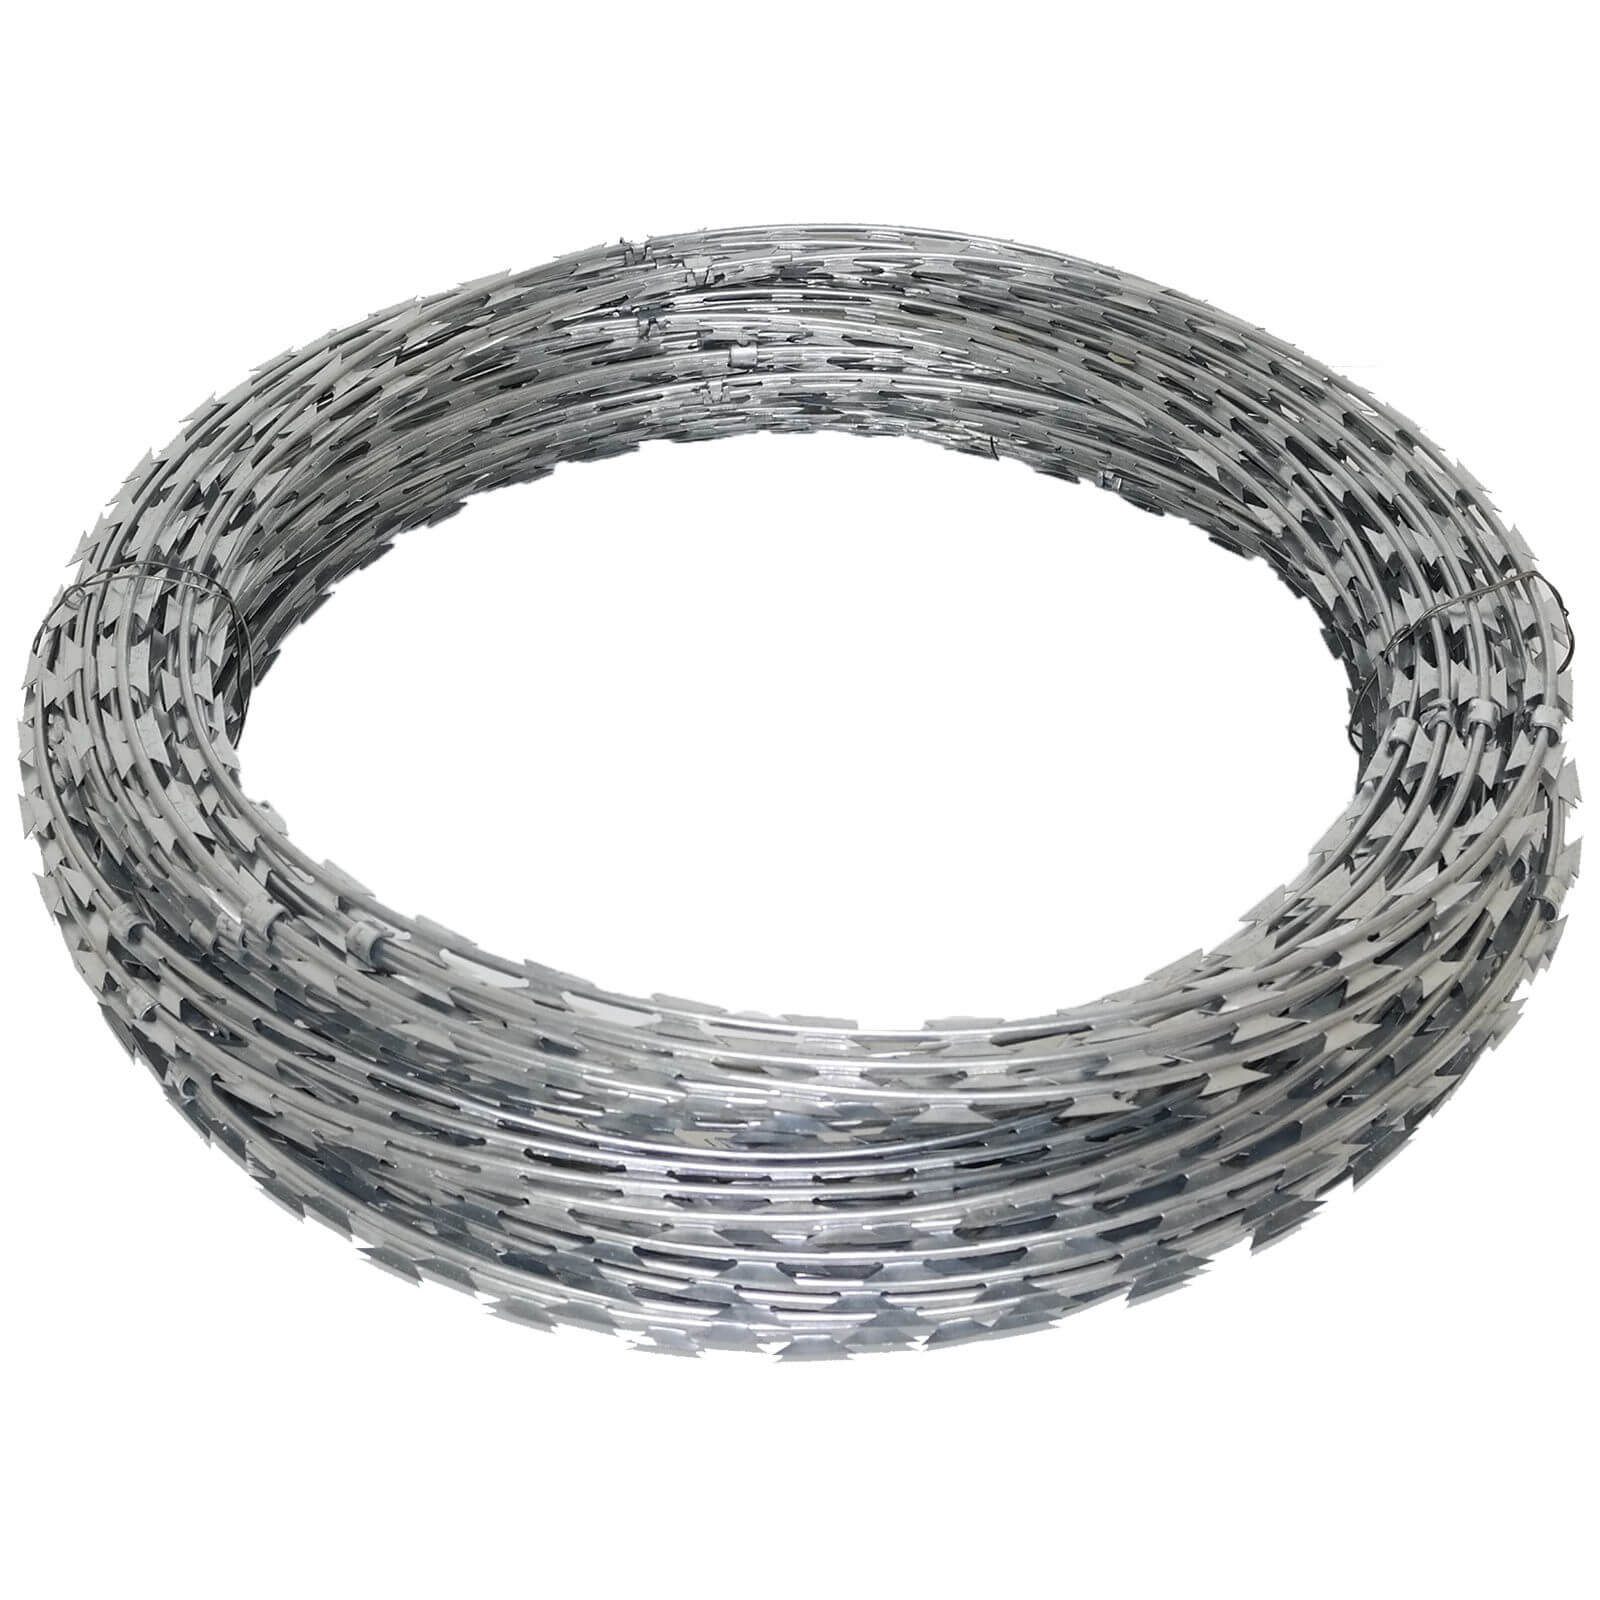 Razor wire fencing: reinforcing security measures with effectiveness